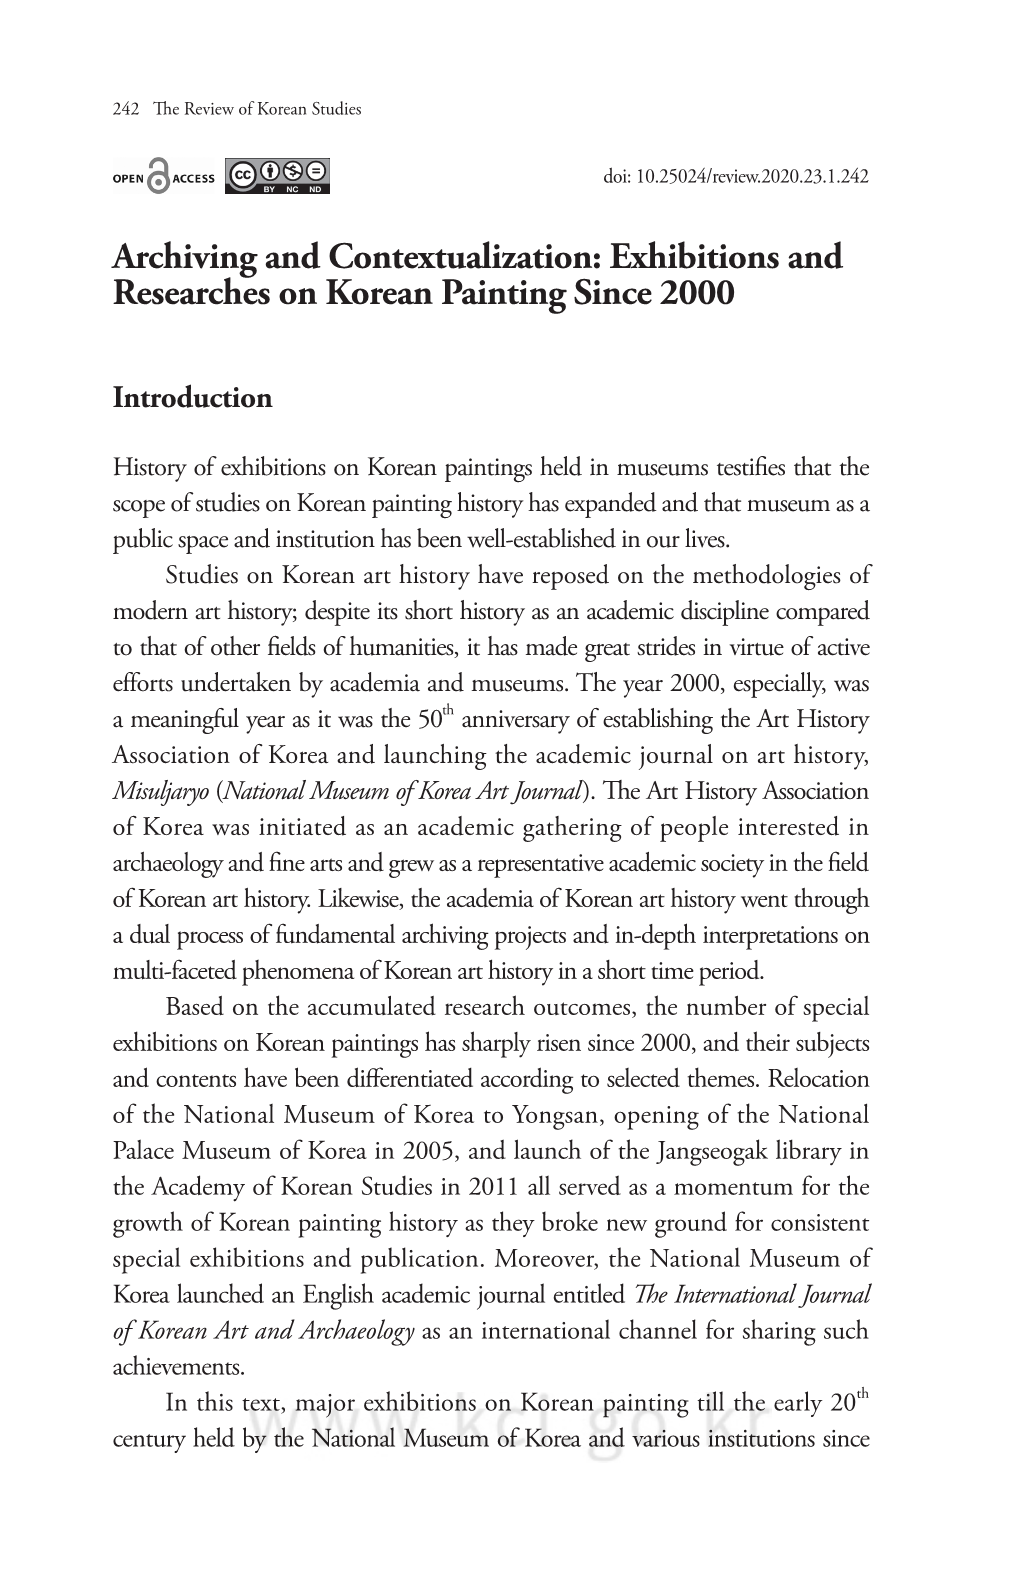 Exhibitions and Researches on Korean Painting Since 2000